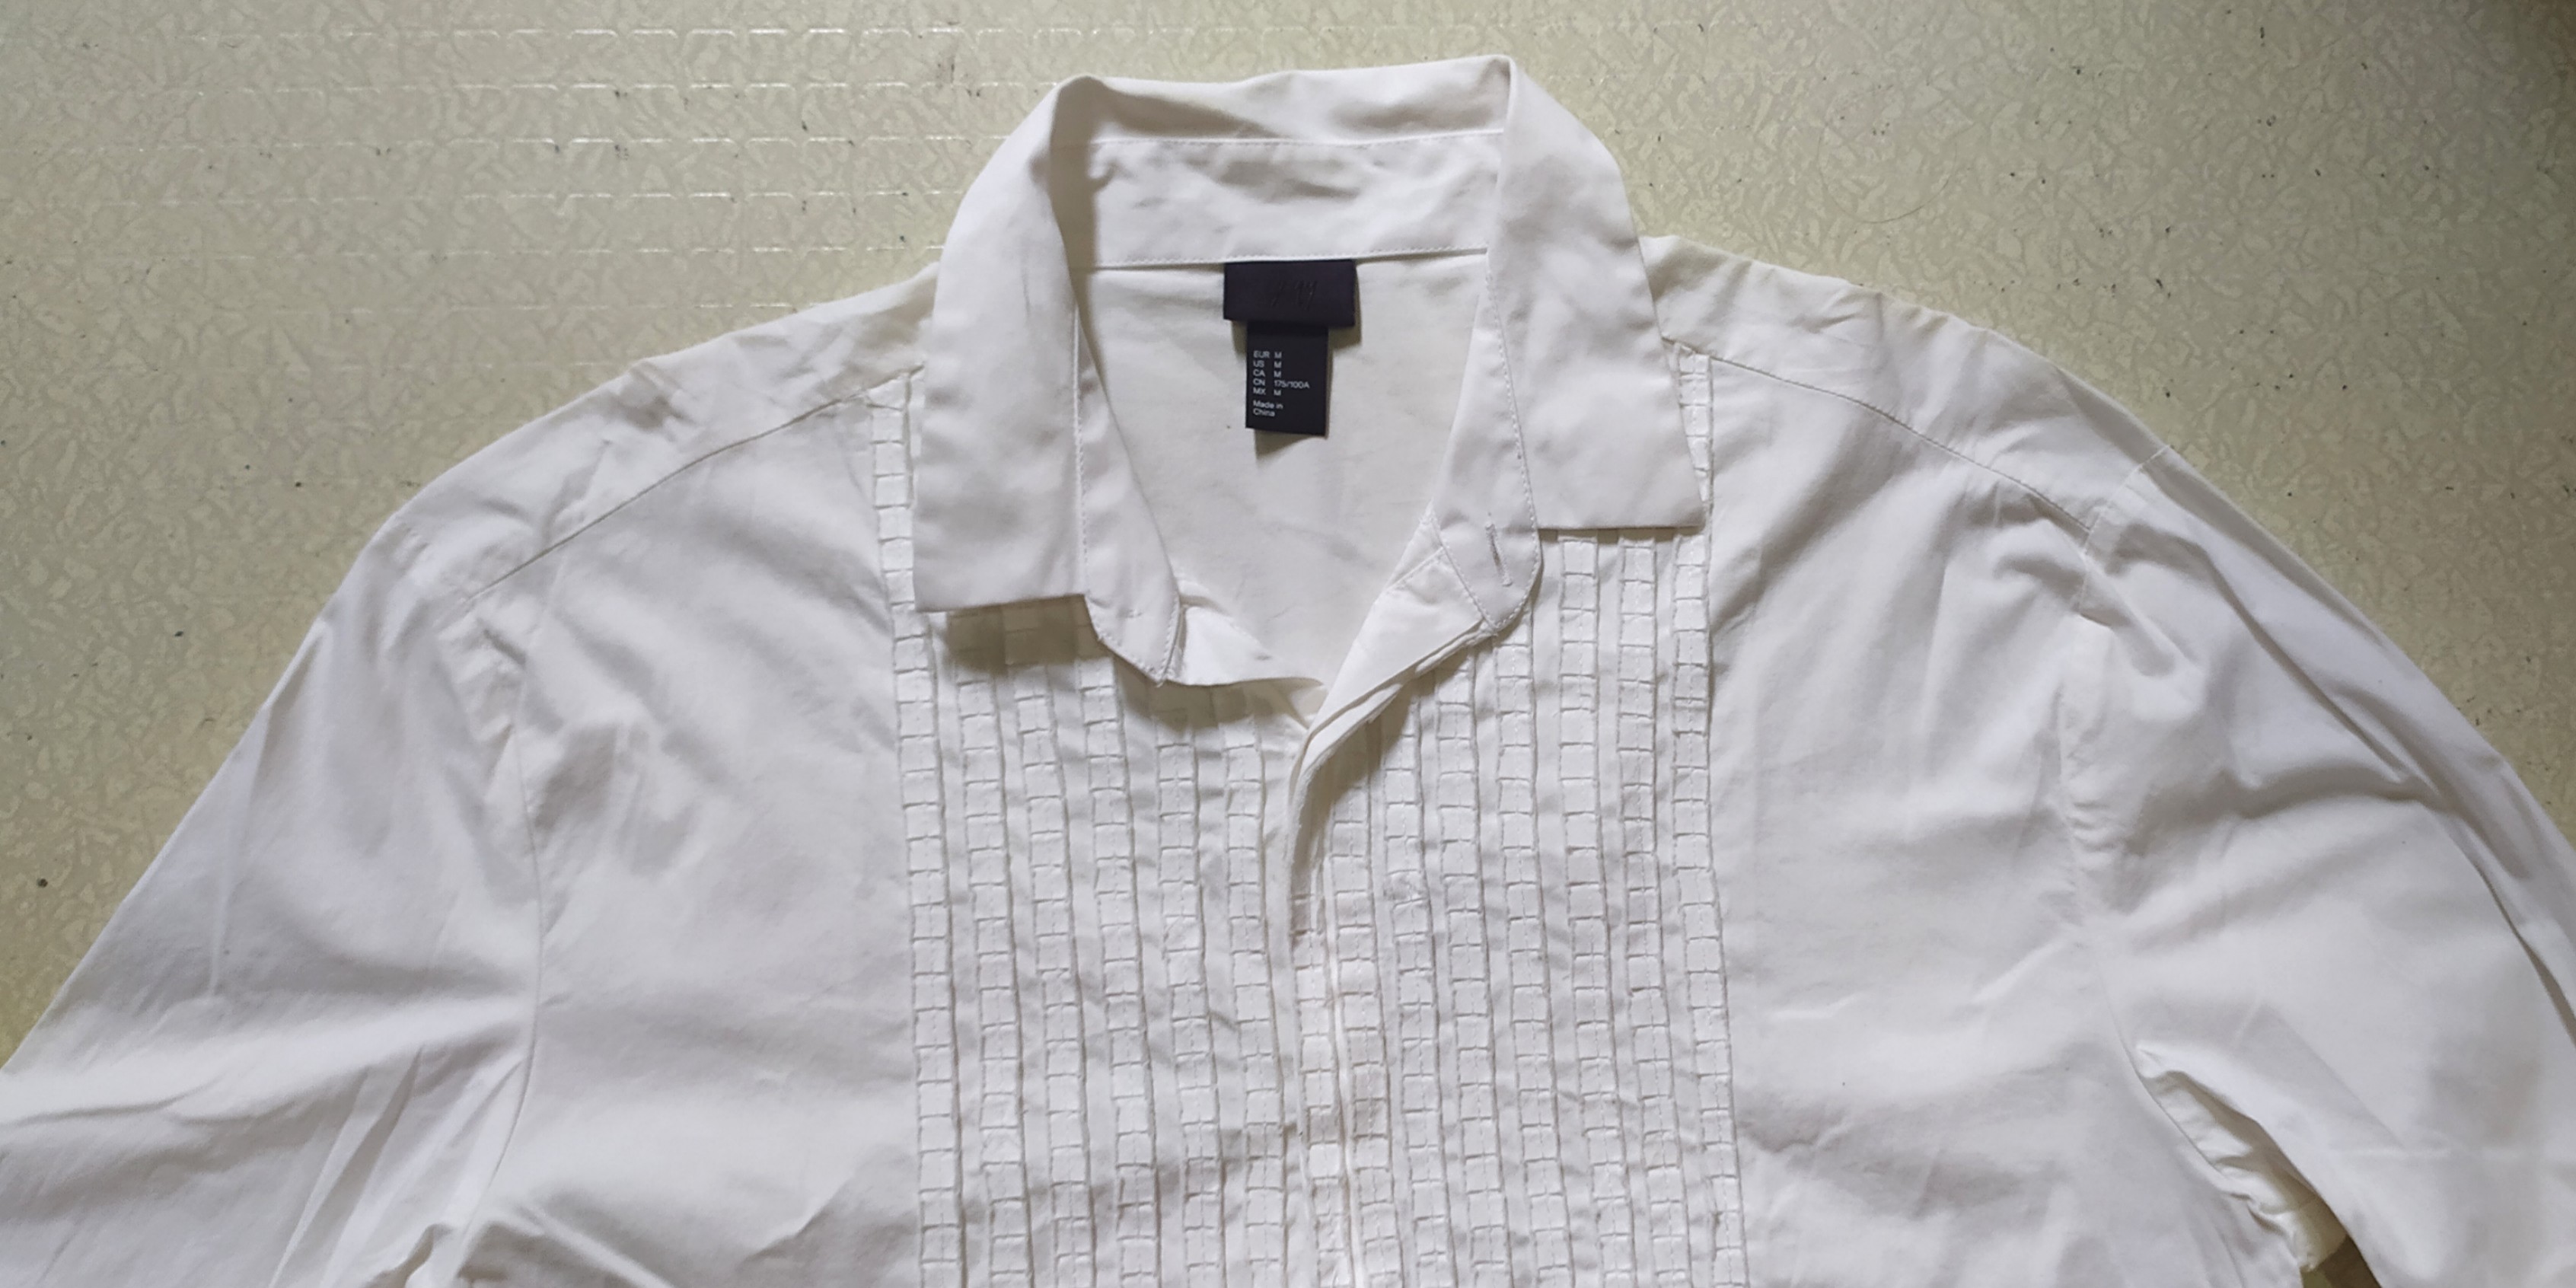 lacoste formal shirt